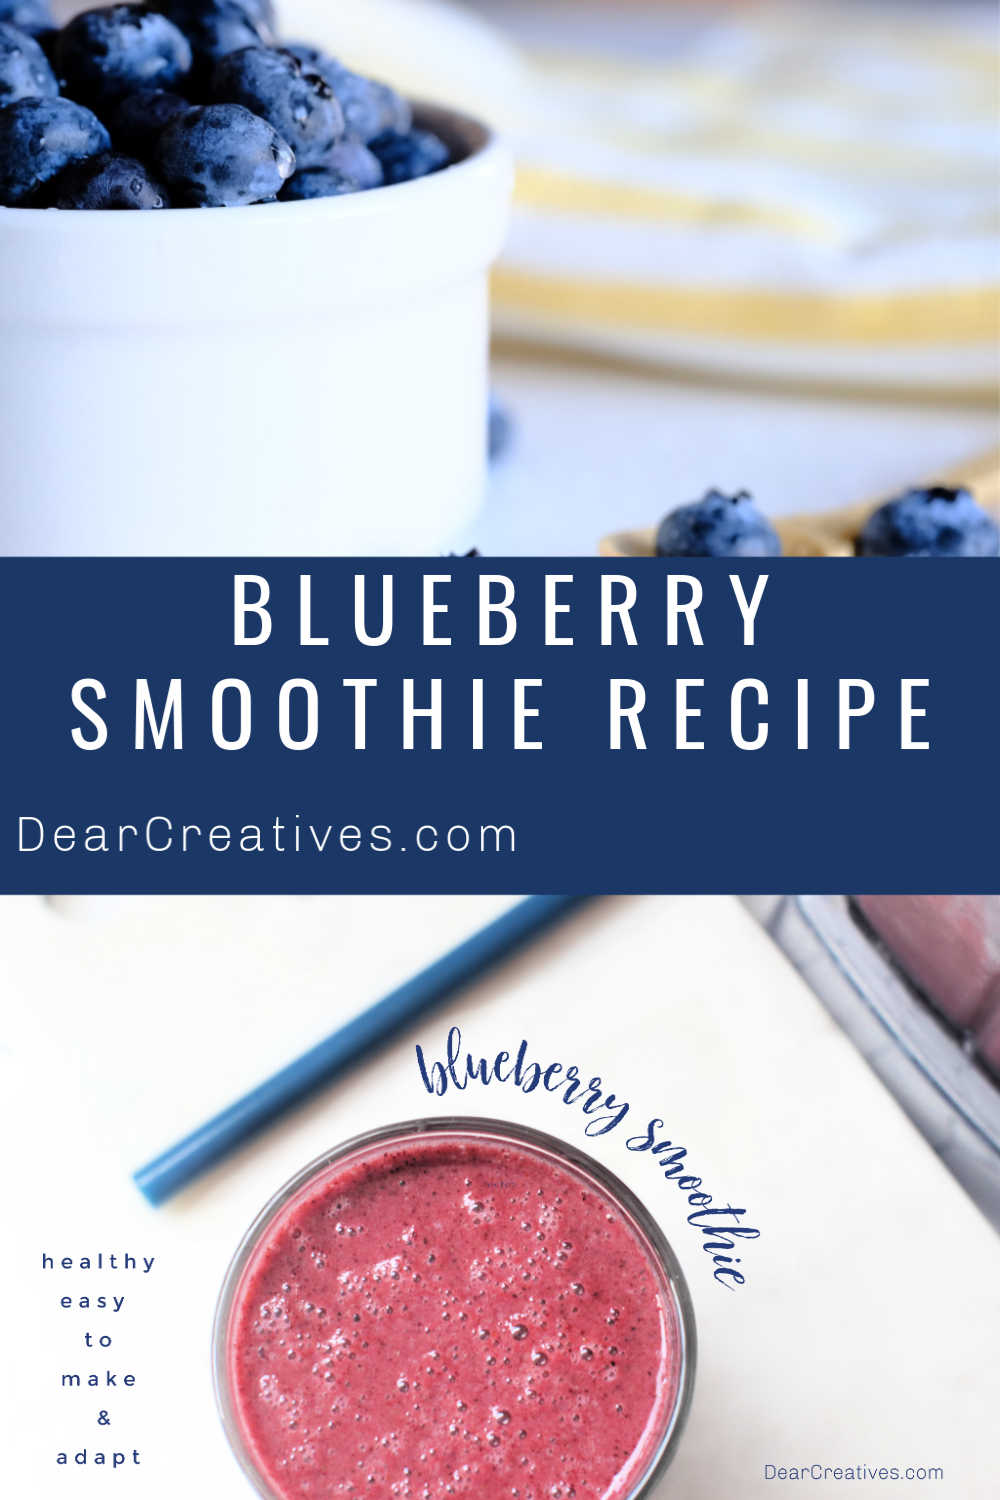 Blueberry Smoothie Recipe - Use Fresh Or Frozen Berries